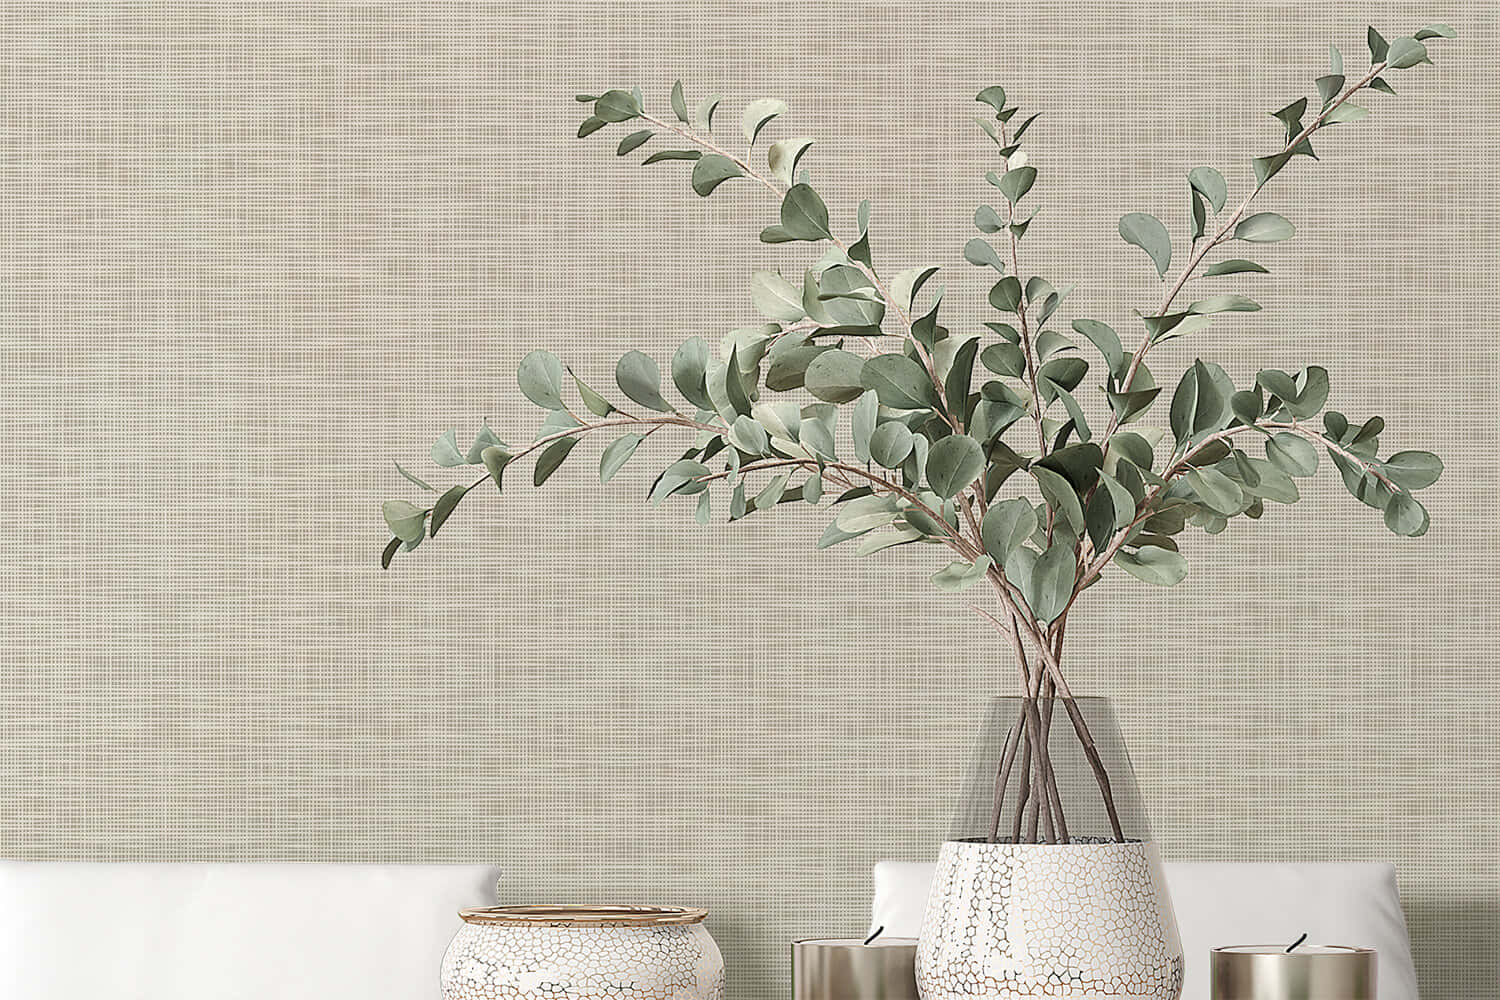 Vase Against A Wall With Subtle Patterns Wallpaper